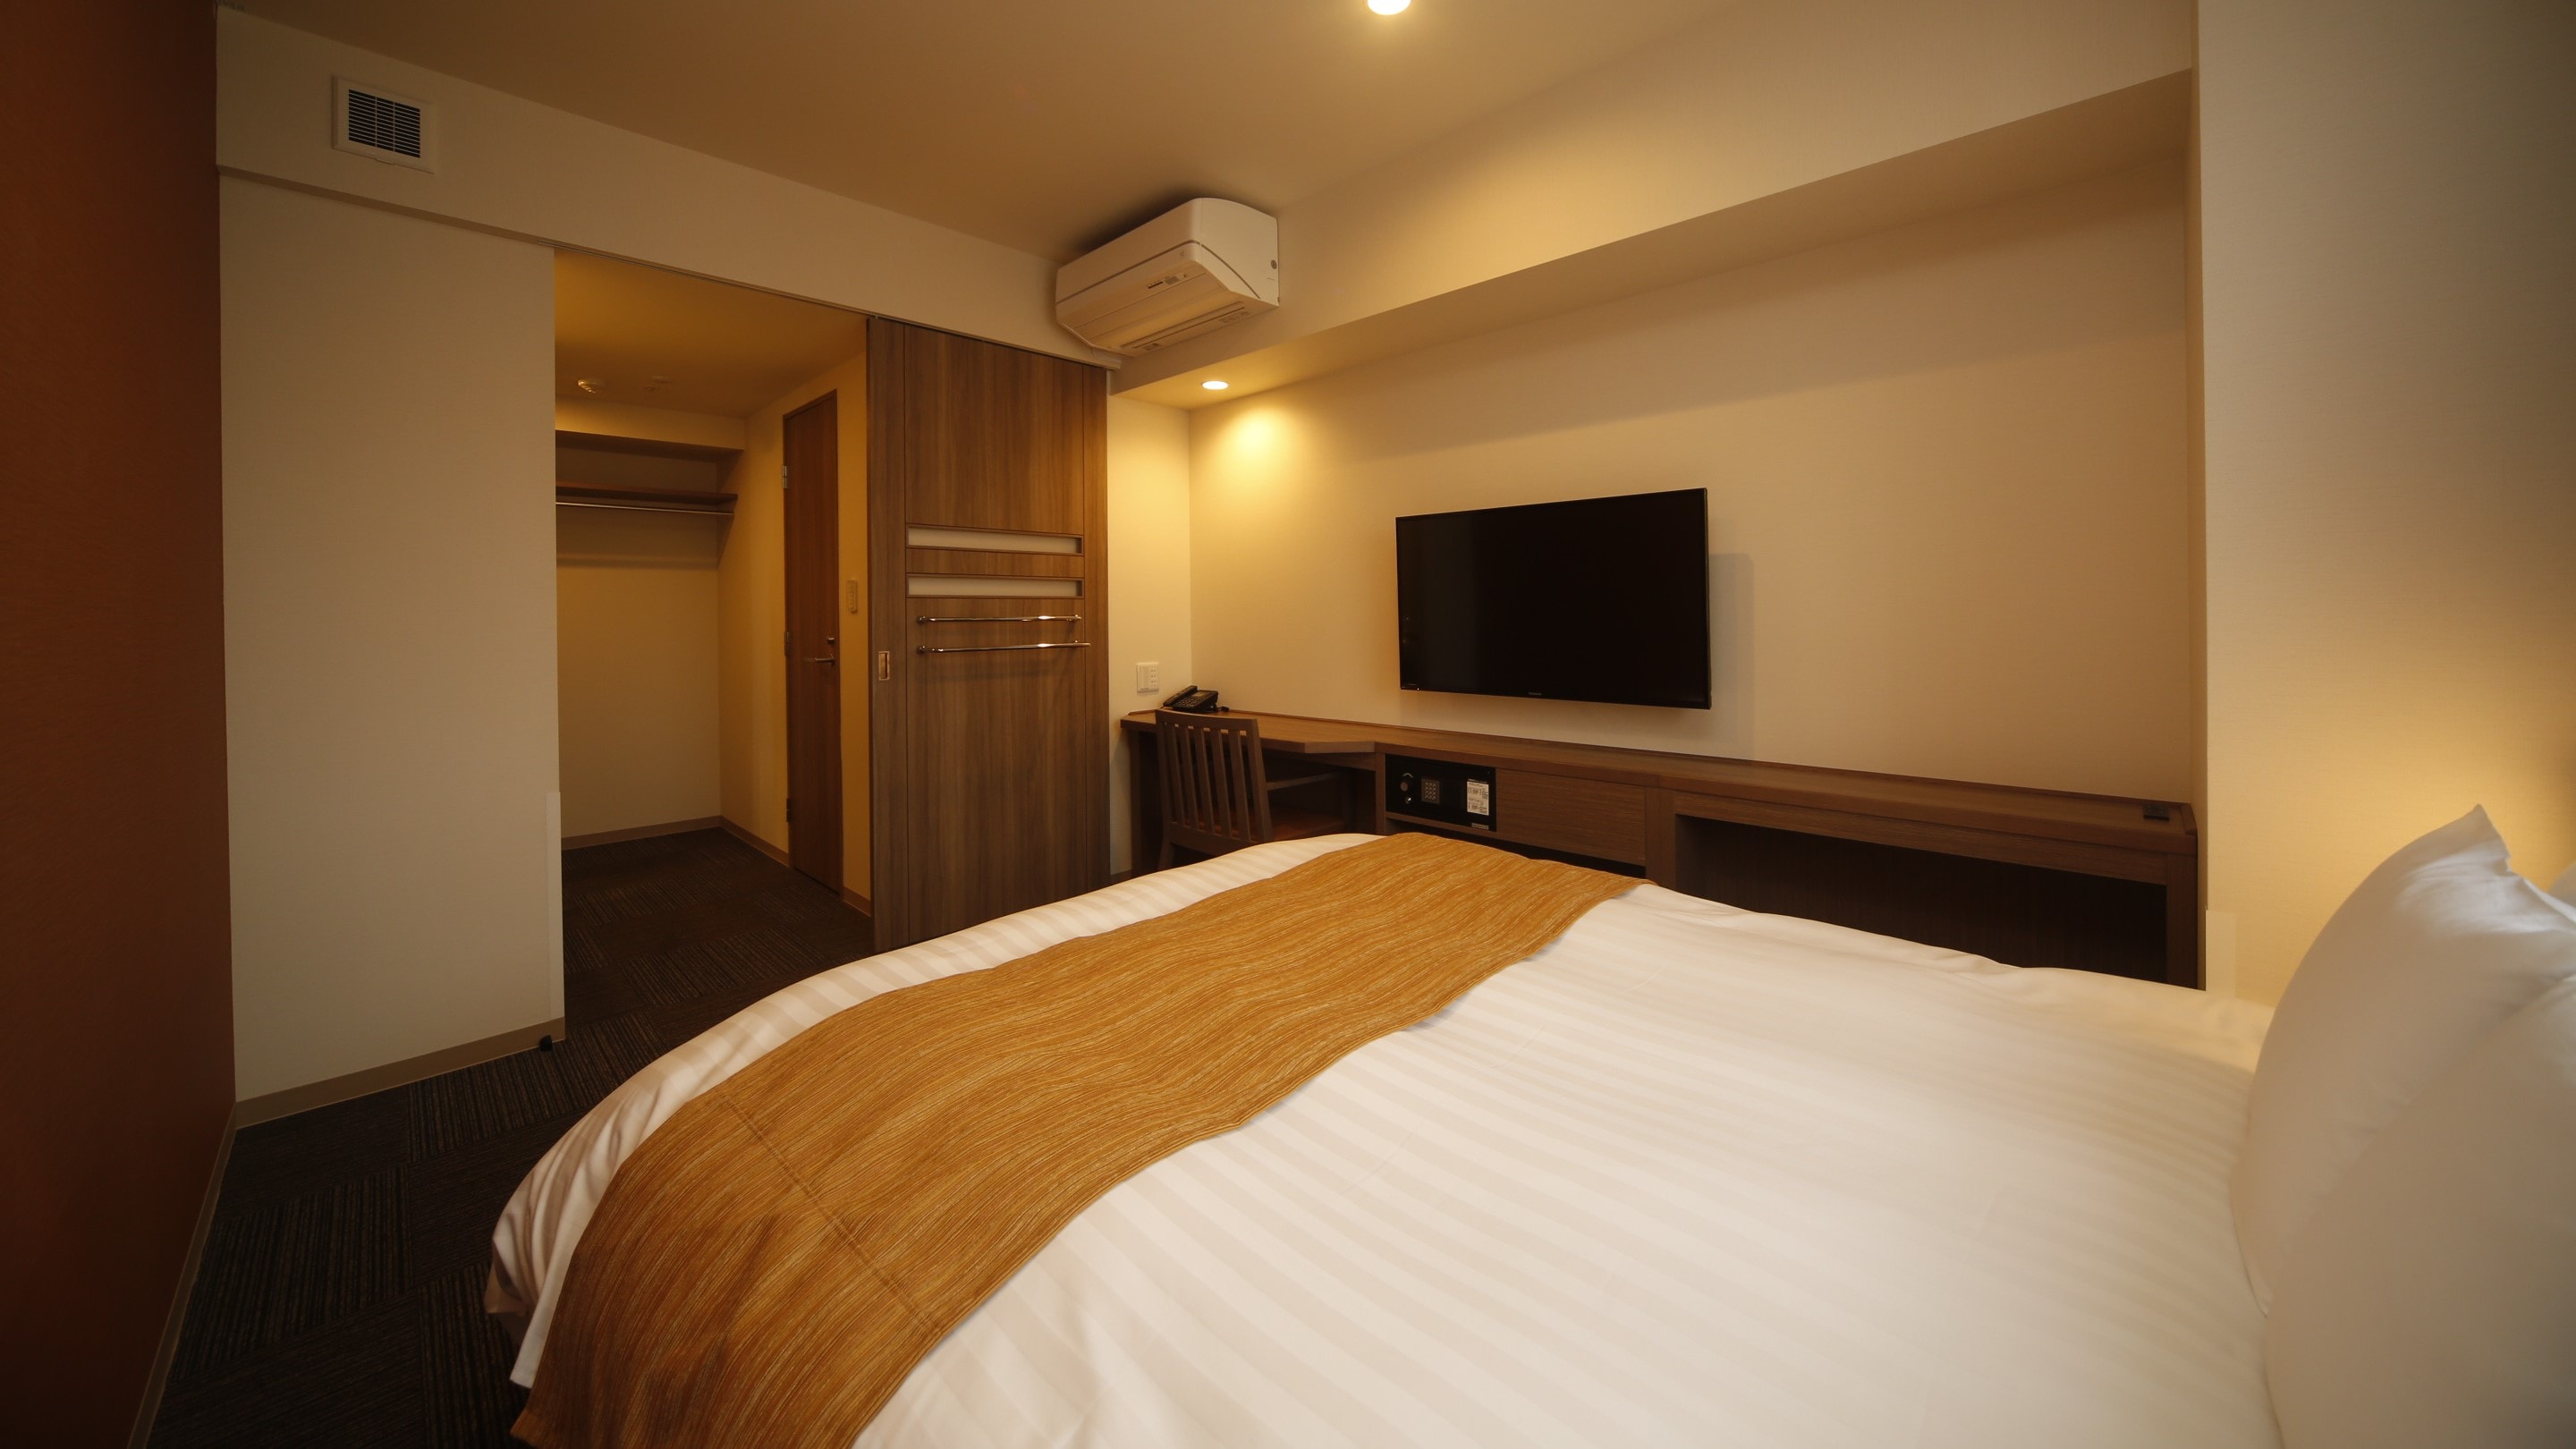 ◆ Non-smoking queen room 20.1 square meters Bed size 160 cm & times; 195 cm